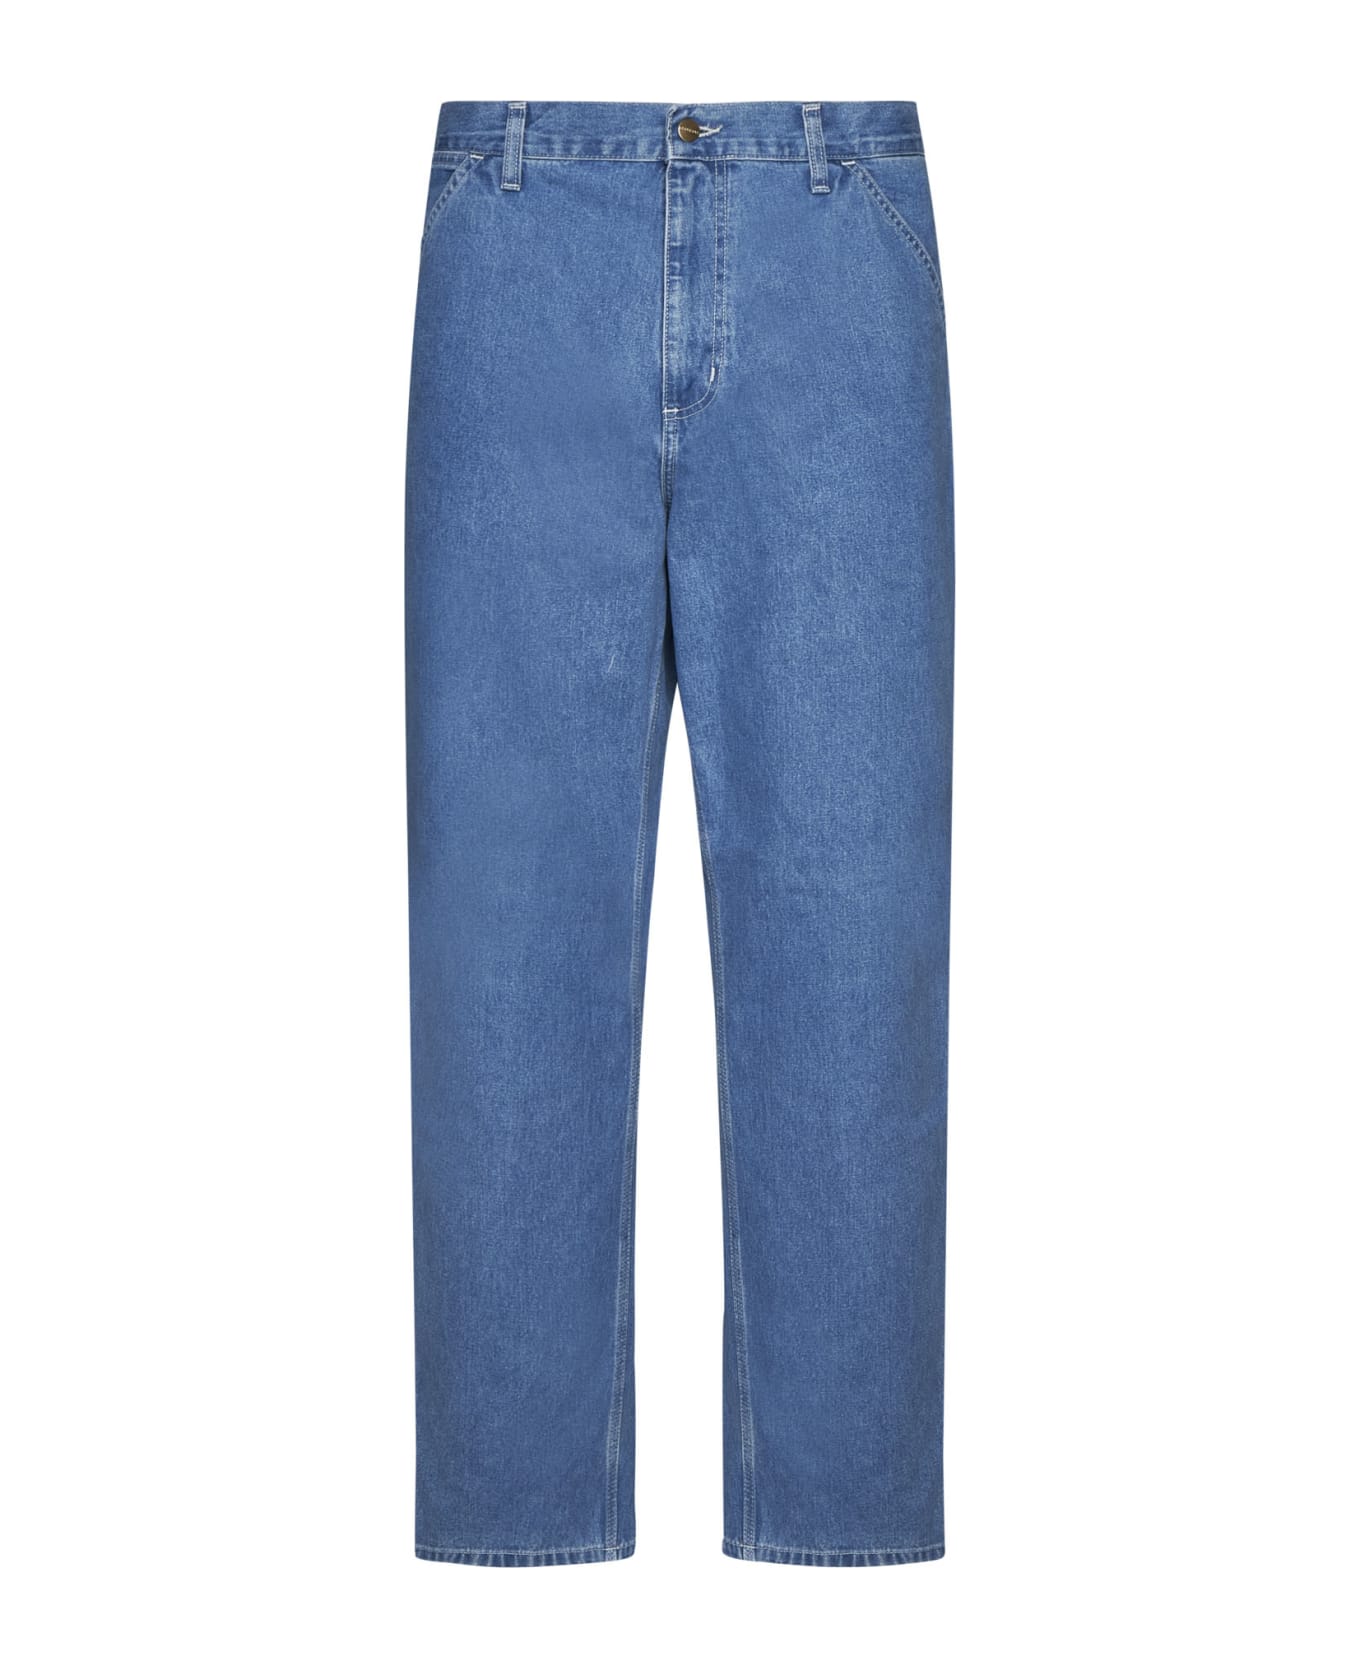 Carhartt Jeans - Blue stone washed